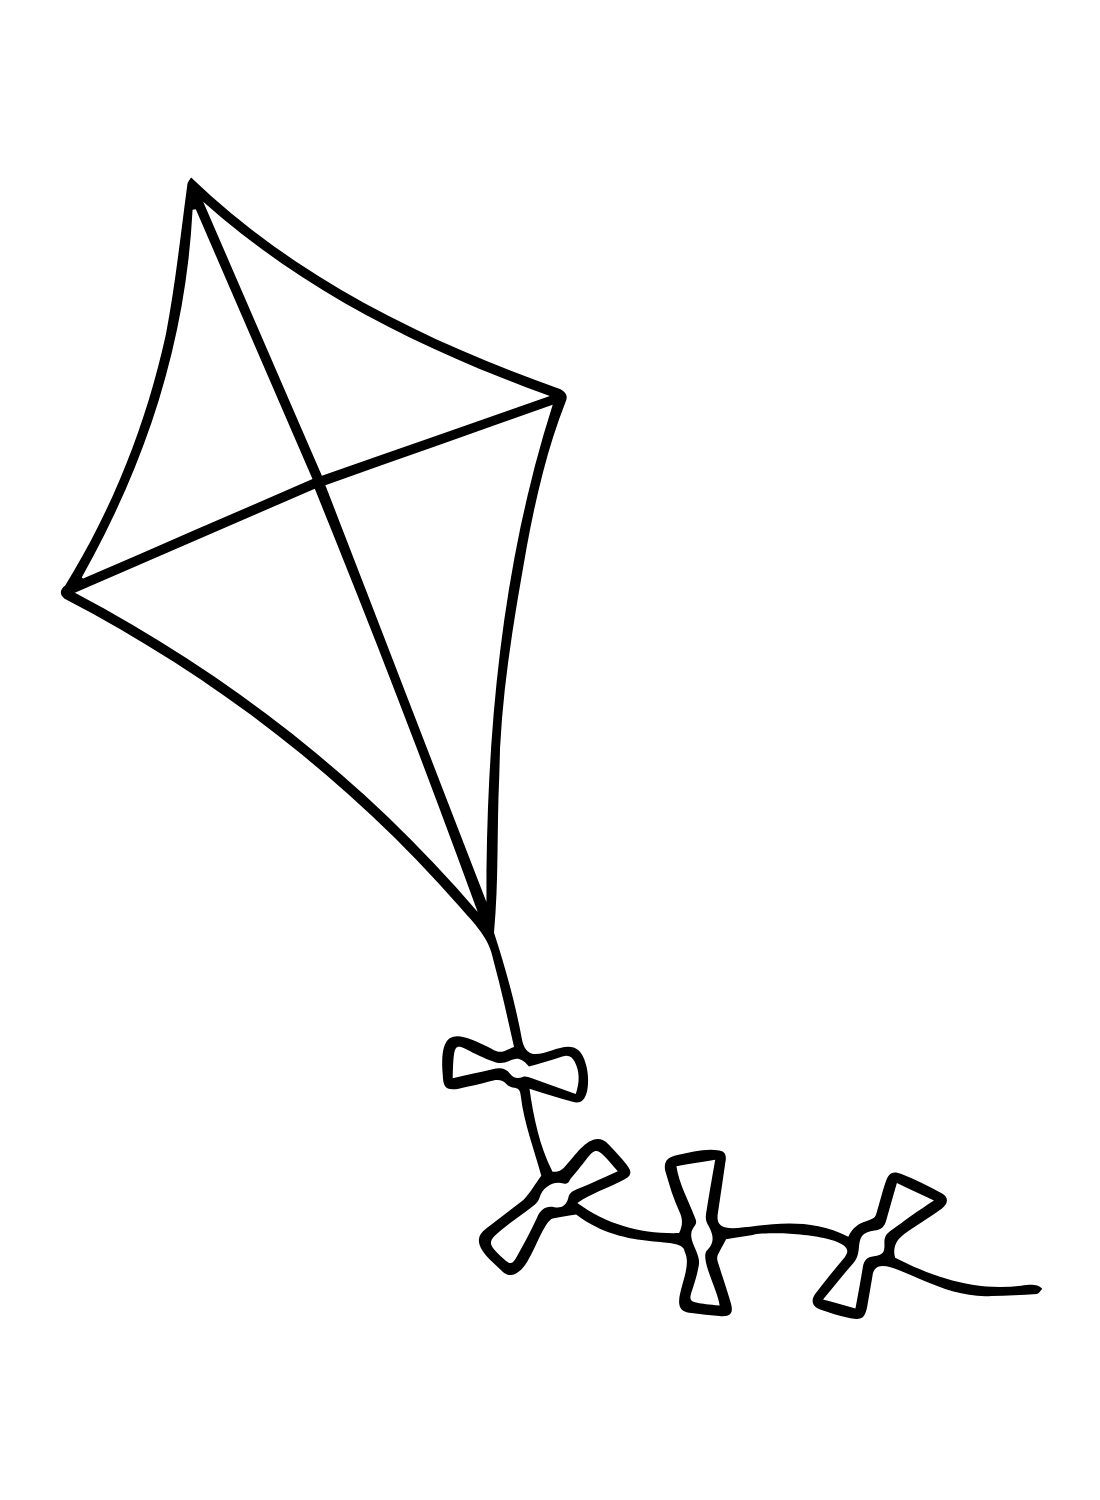 kite coloring pages